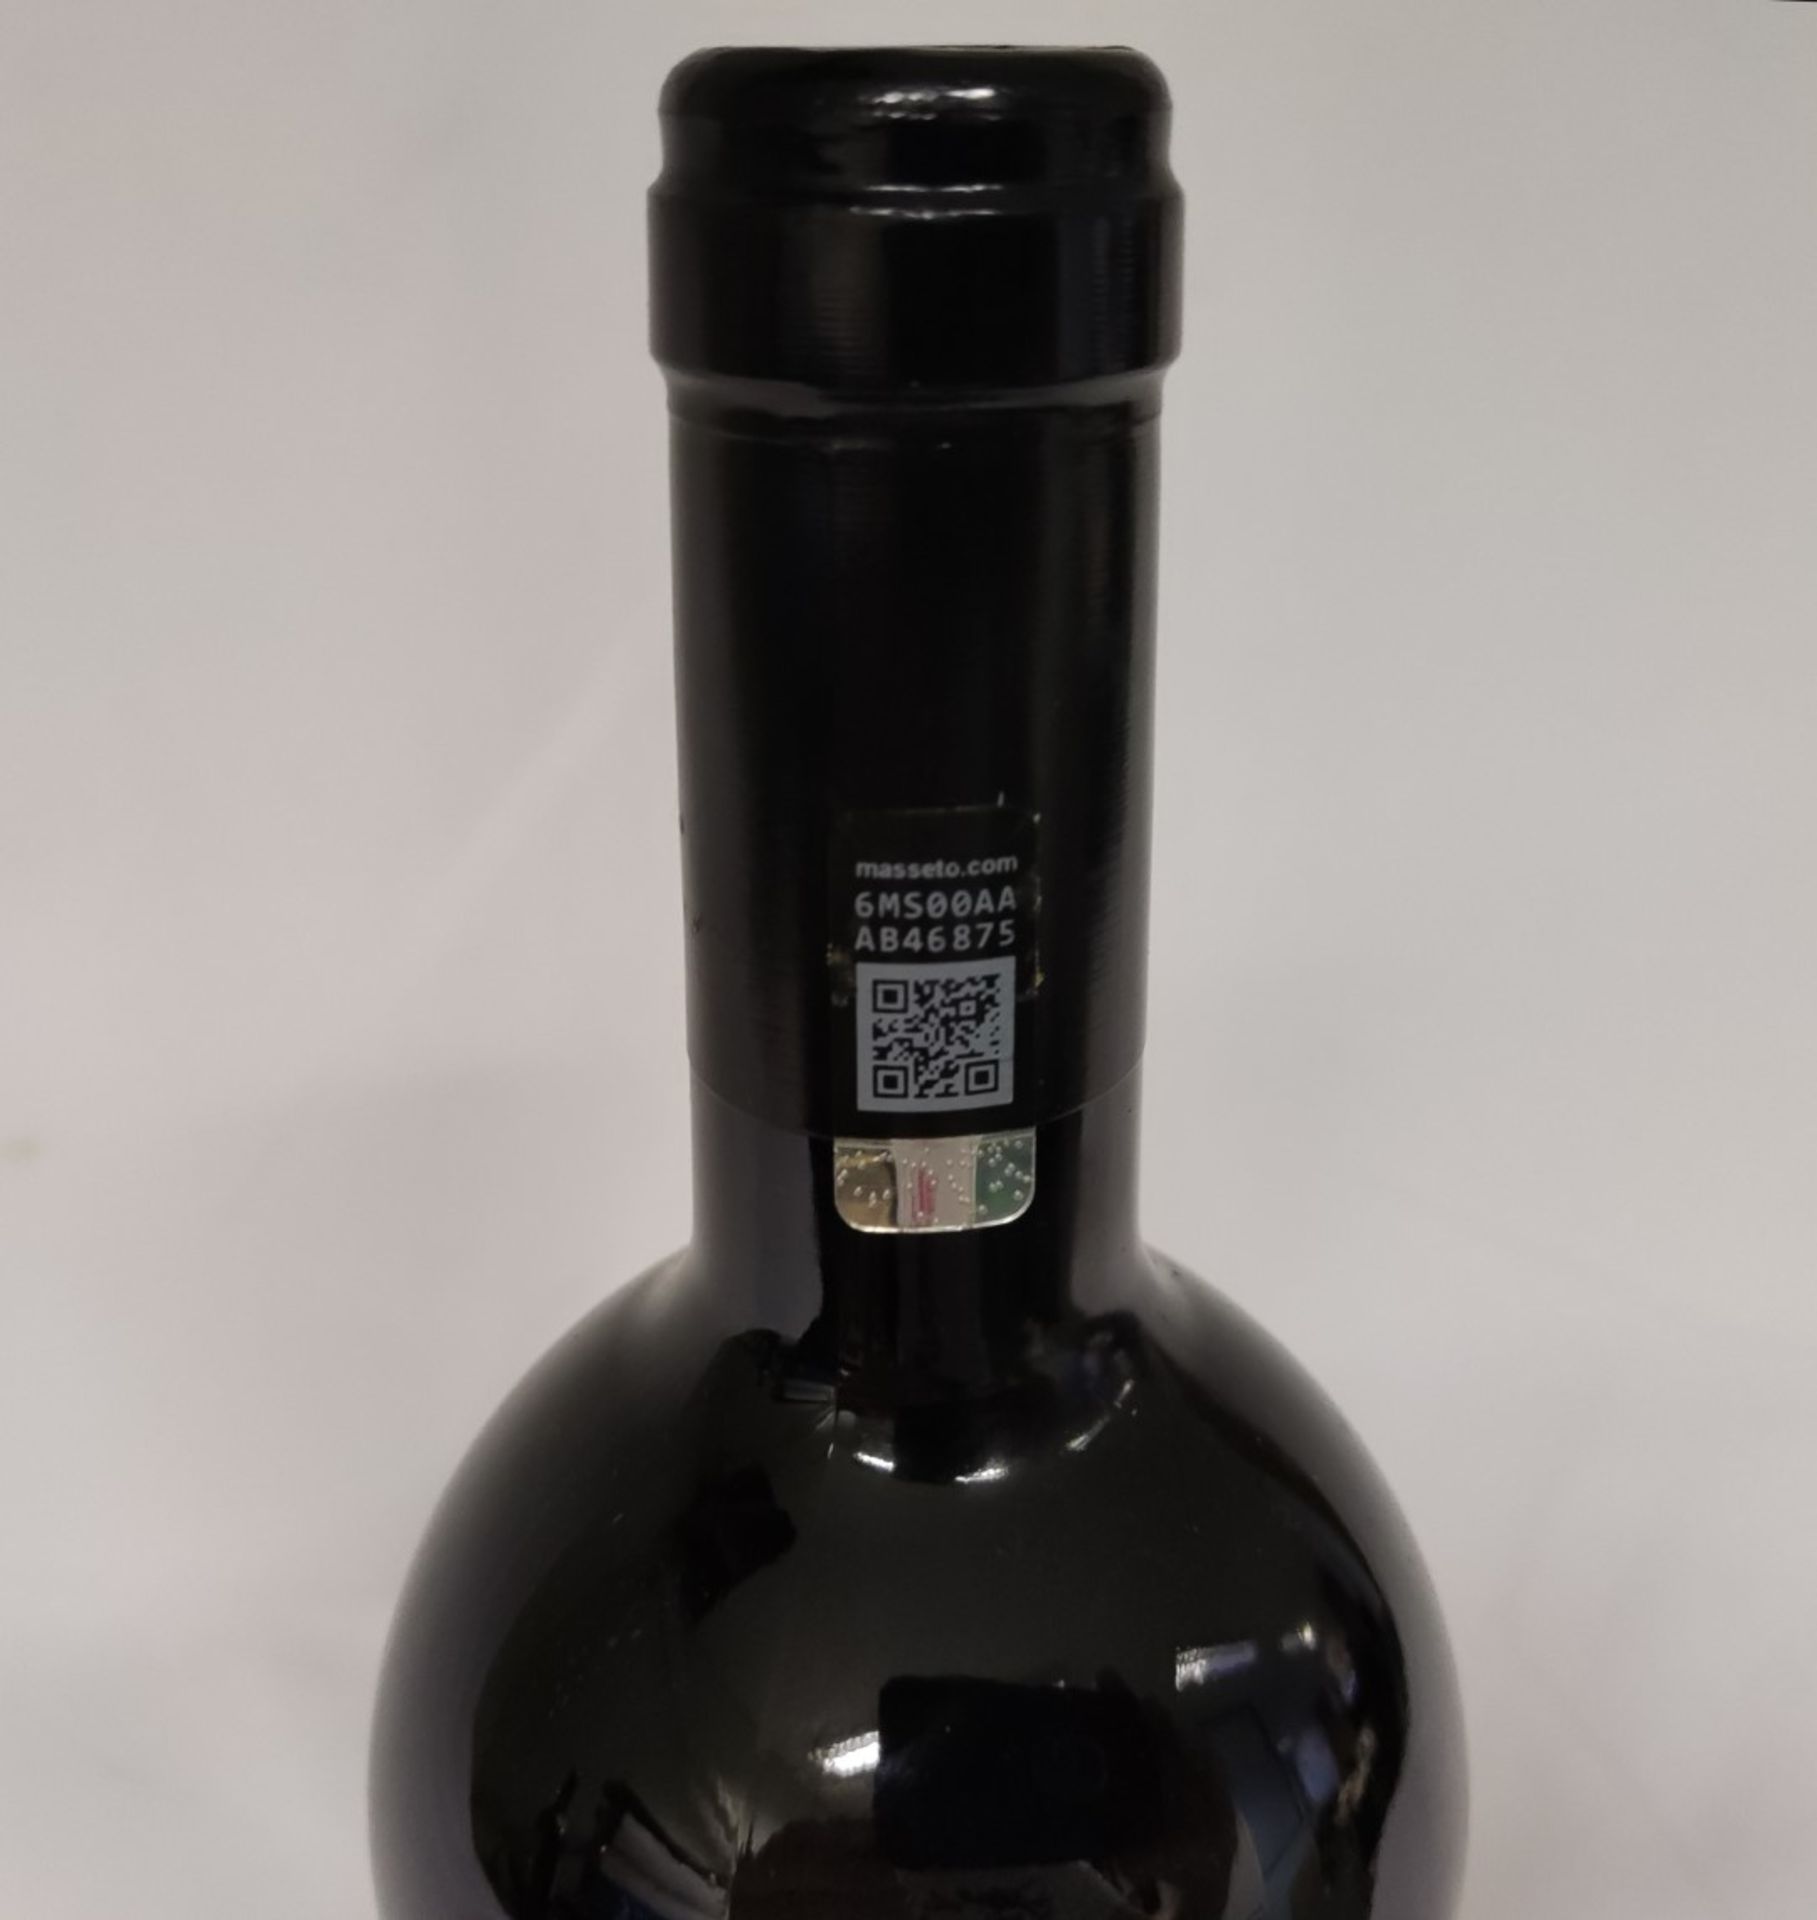 1 x Bottle of 2018 Massetino Toscana IGT Red Wine, Tuscany, Italy - Retail Price £375 - Ref: WAS315/ - Image 5 of 6